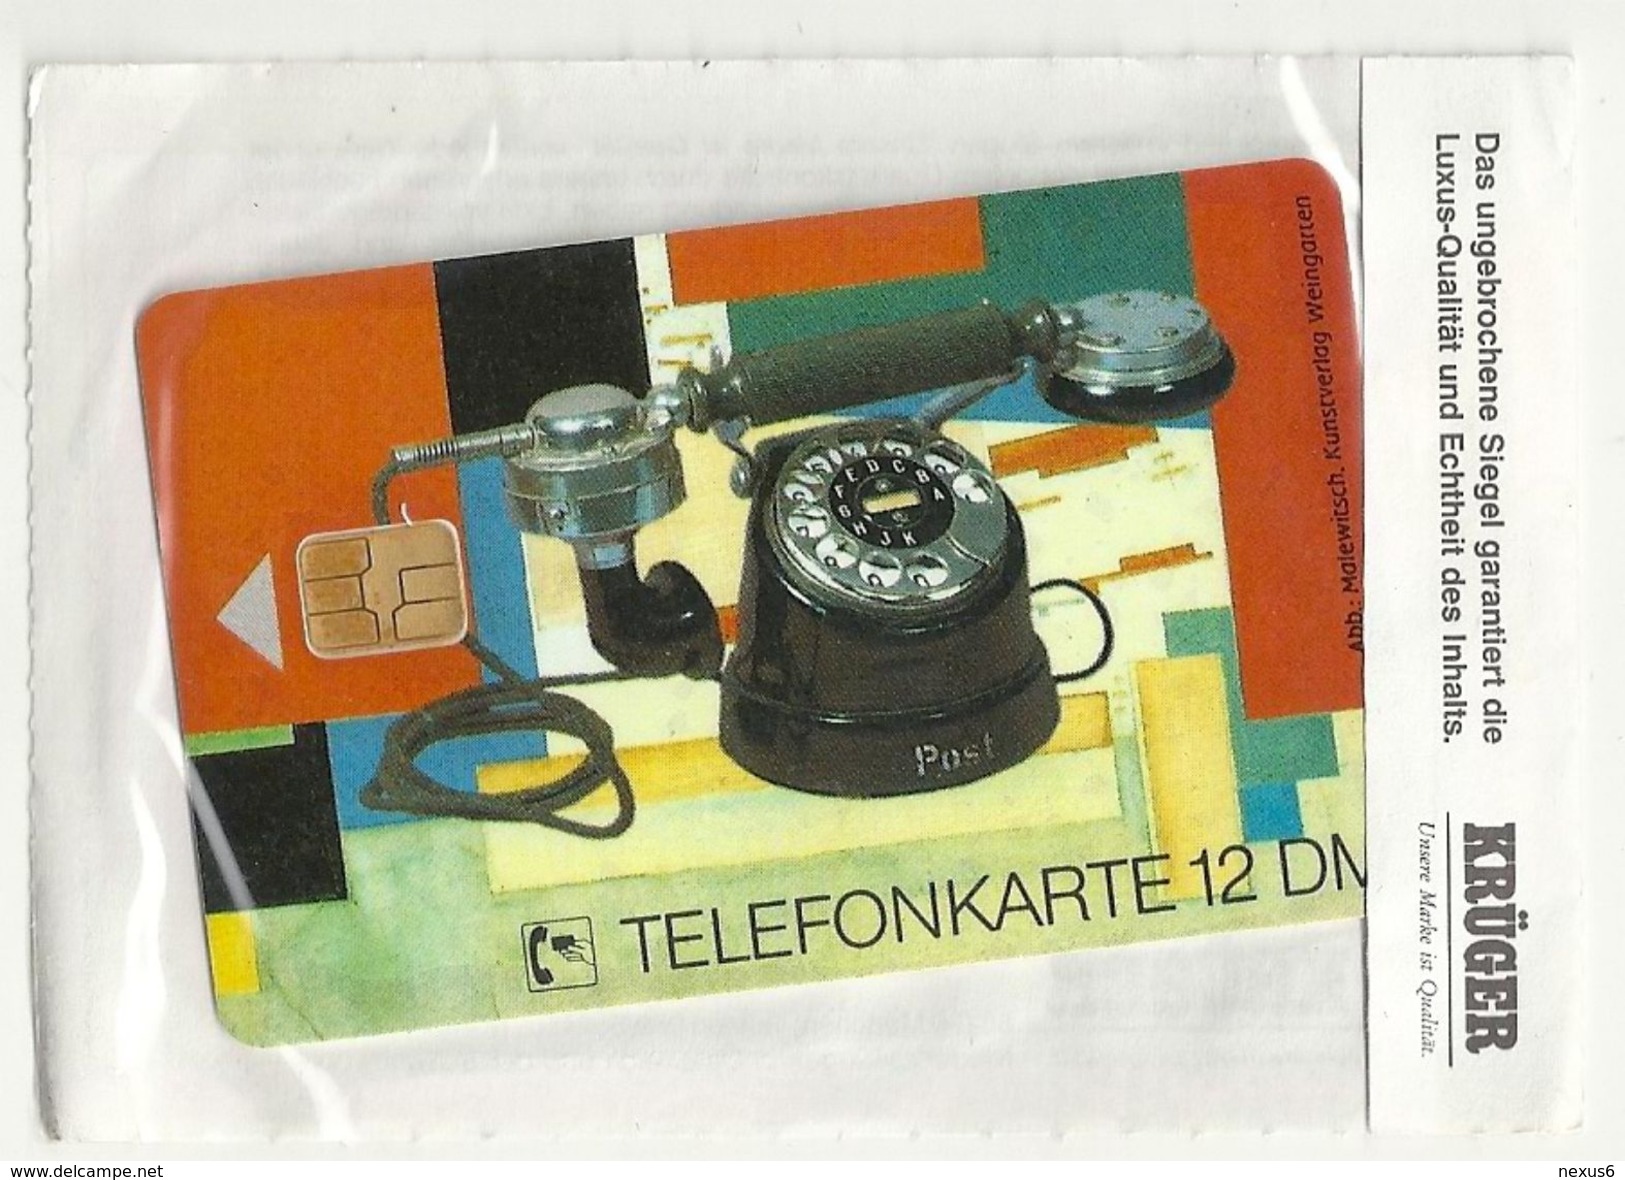 Germany - Alte Telefonapparate 4 - Collector's E08 08.92 - 12DM, 30.000ex, Mint In Kruger - E-Reeksen : Uitgave - D. Postreclame